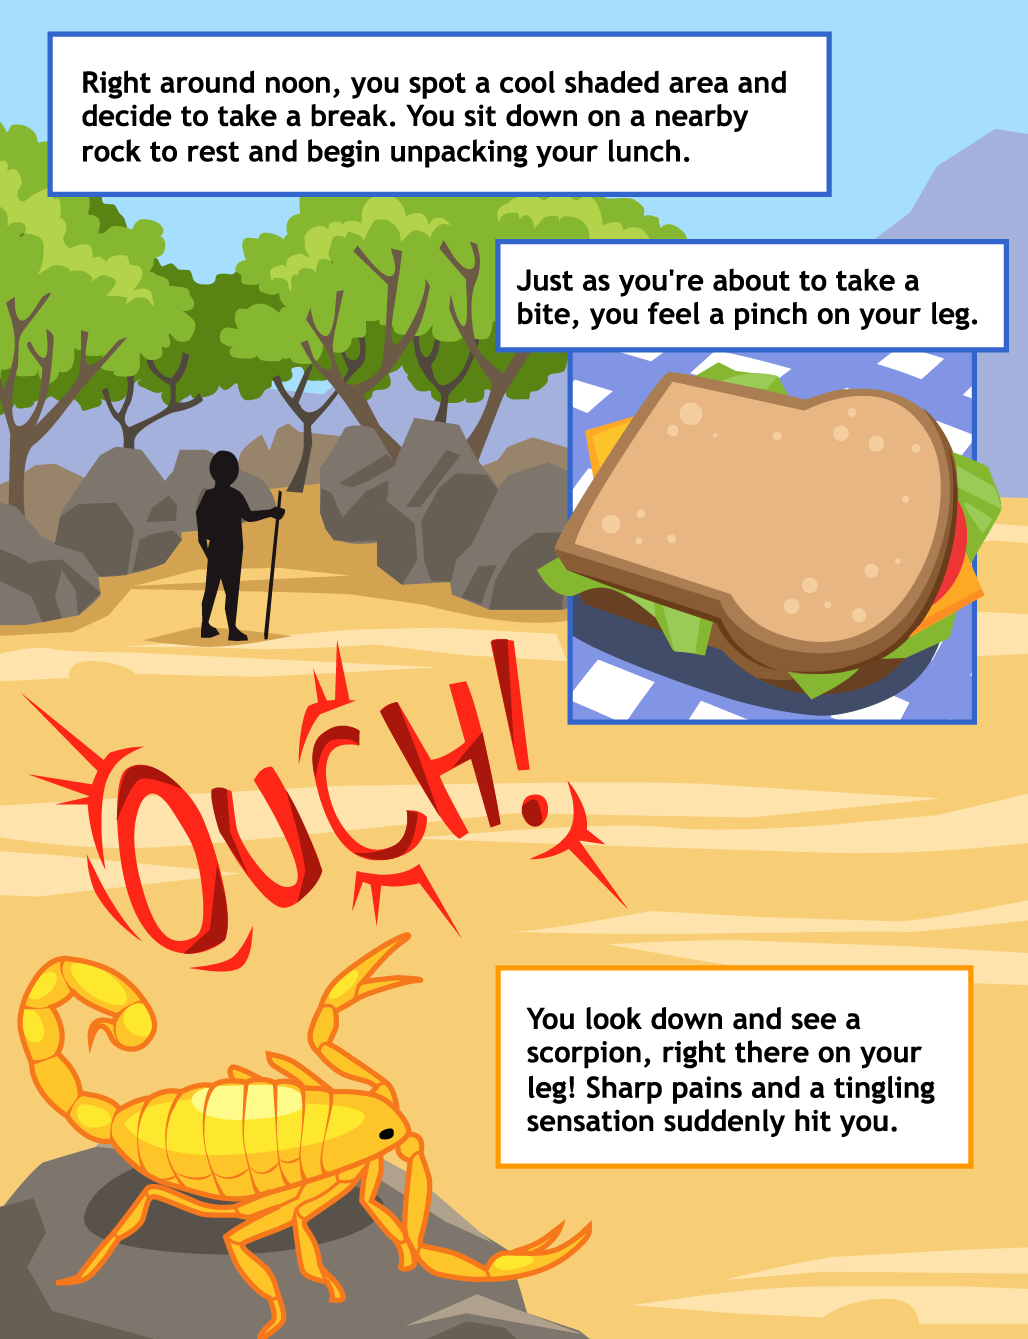 Story page 2: stung by a scorpion